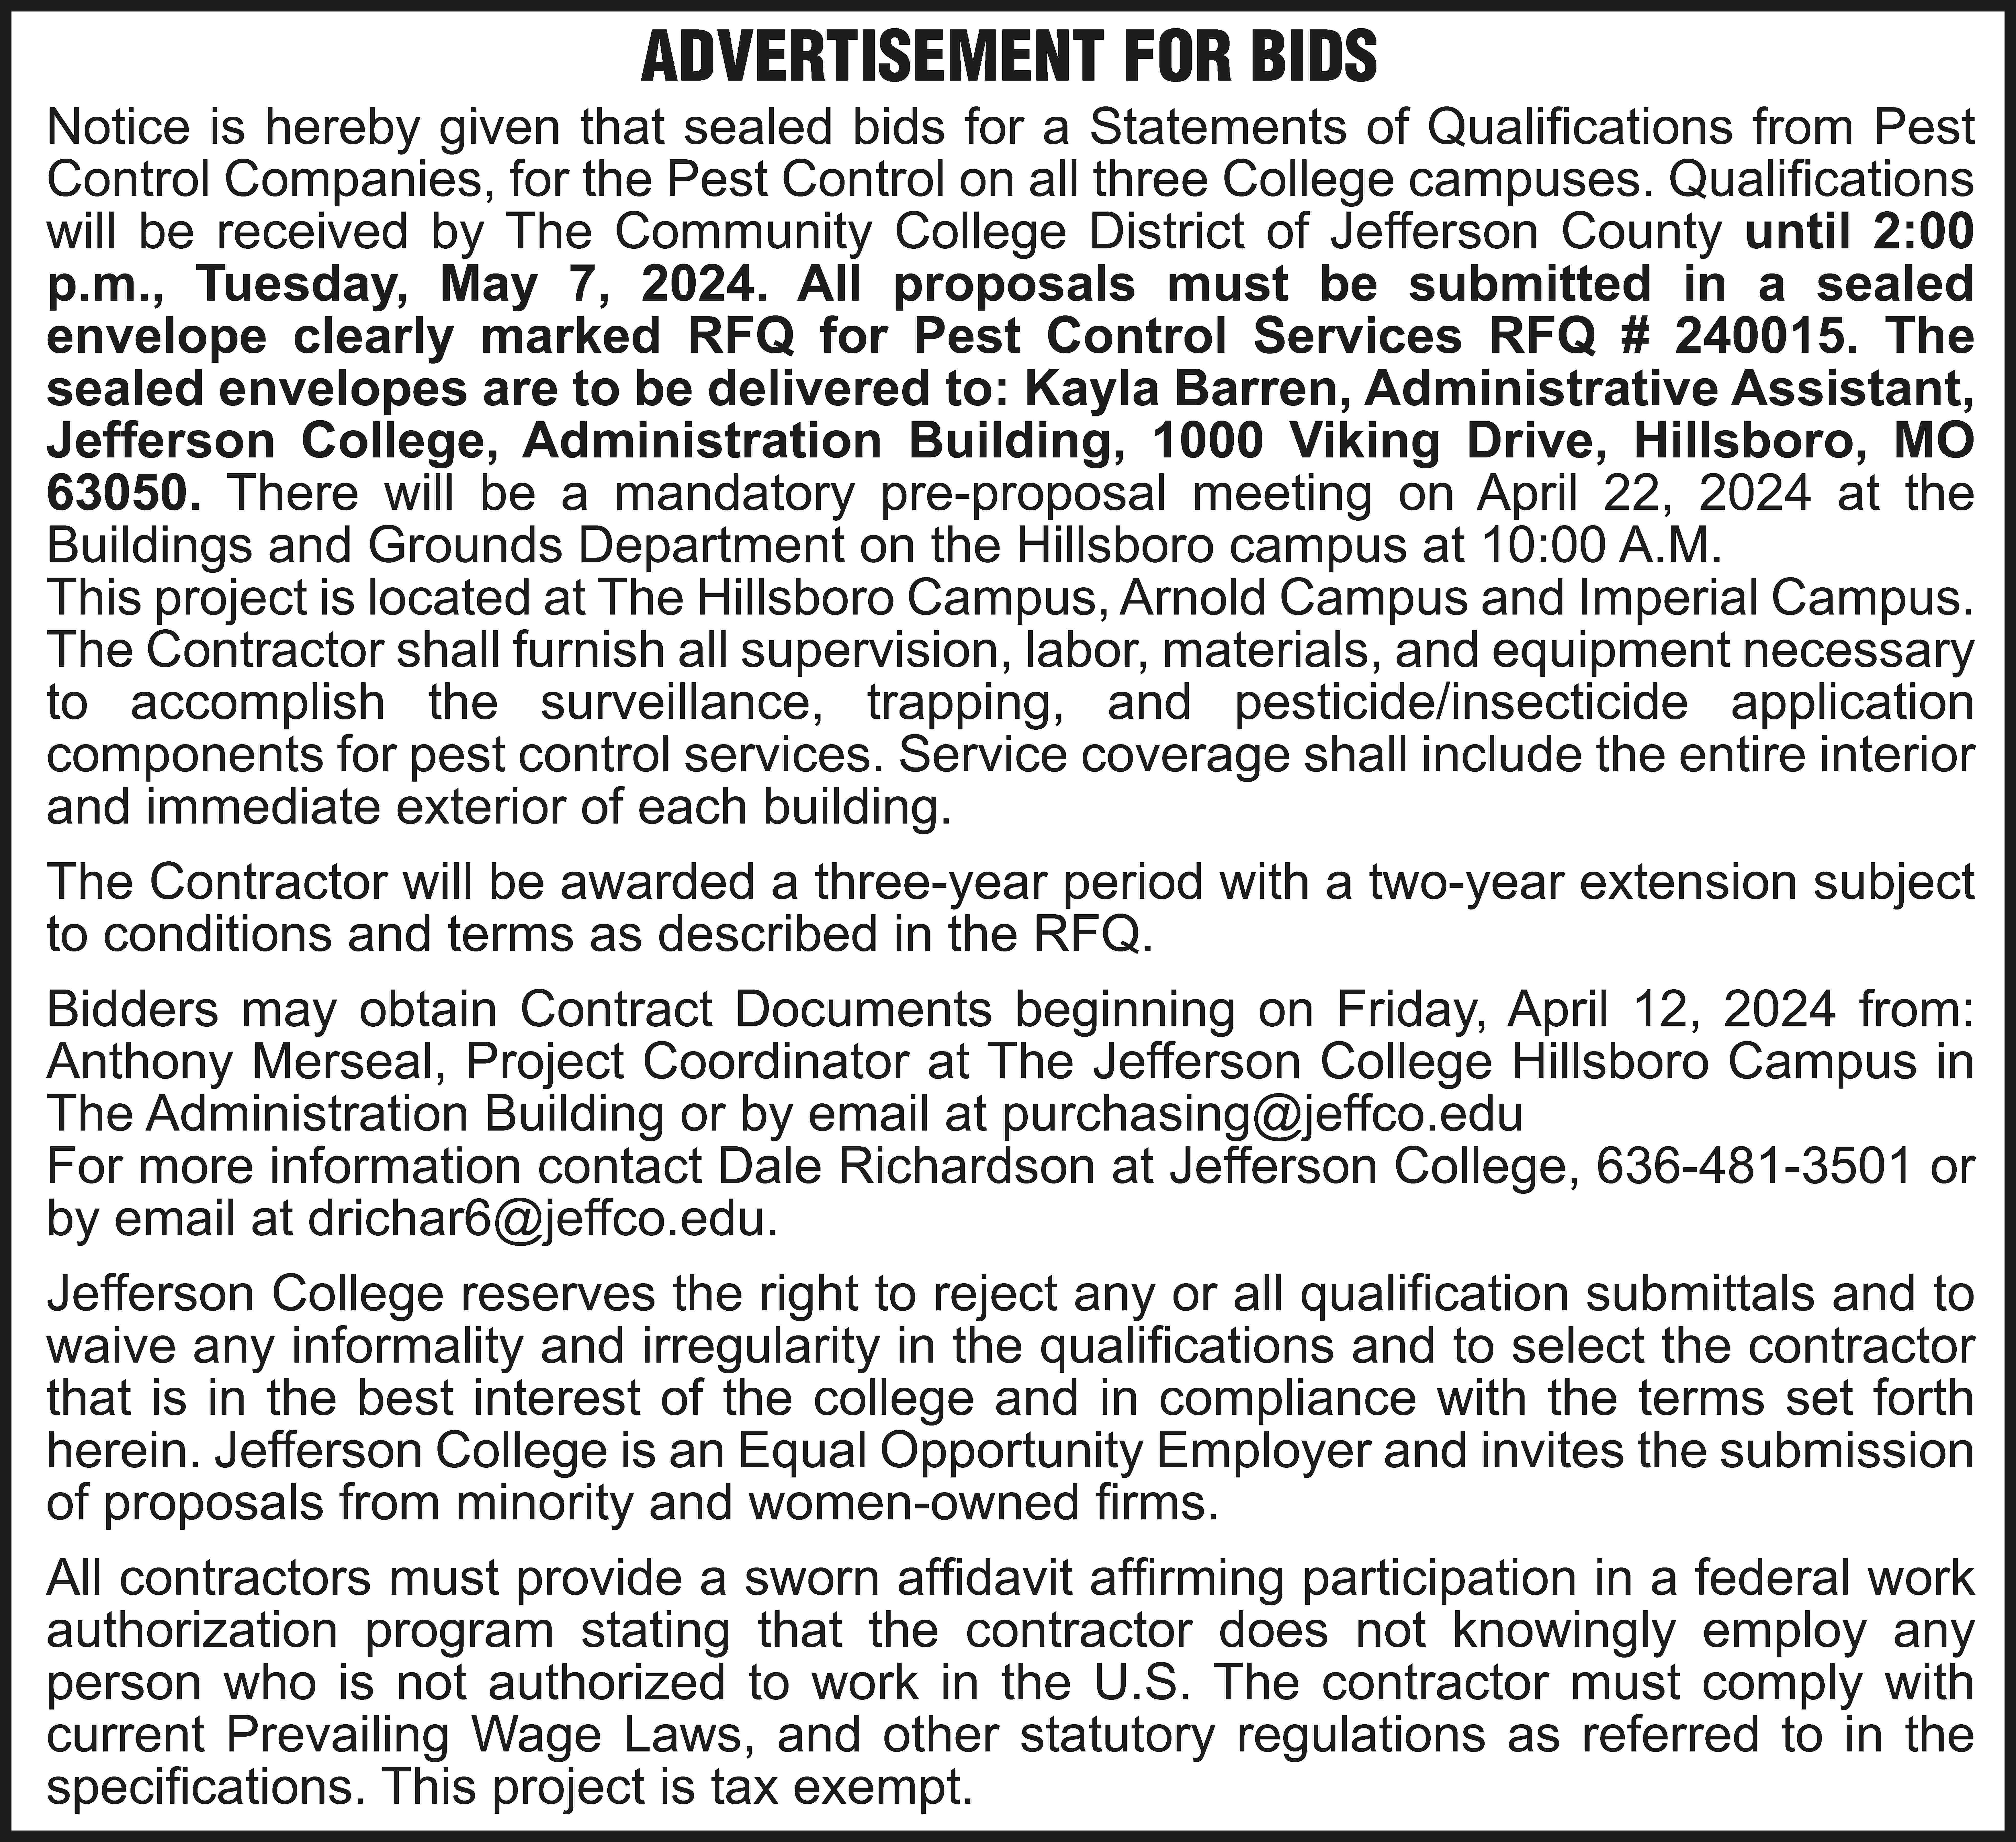 ADVERTISEMENT FOR BIDS Notice is  ADVERTISEMENT FOR BIDS Notice is hereby given that sealed bids for a Statements of Qualifications from Pest Control Companies, for the Pest Control on all three College campuses. Qualifications will be received by The Community College District of Jefferson County until 2:00 p.m., Tuesday, May 7, 2024. All proposals must be submitted in a sealed envelope clearly marked RFQ for Pest Control Services RFQ # 240015. The sealed envelopes are to be delivered to: Kayla Barren, Administrative Assistant, Jefferson College, Administration Building, 1000 Viking Drive, Hillsboro, MO 63050. There will be a mandatory pre-proposal meeting on April 22, 2024 at the Buildings and Grounds Department on the Hillsboro campus at 10:00 A.M. This project is located at The Hillsboro Campus, Arnold Campus and Imperial Campus. The Contractor shall furnish all supervision, labor, materials, and equipment necessary to accomplish the surveillance, trapping, and pesticide/insecticide application components for pest control services. Service coverage shall include the entire interior and immediate exterior of each building. The Contractor will be awarded a three-year period with a two-year extension subject to conditions and terms as described in the RFQ. Bidders may obtain Contract Documents beginning on Friday, April 12, 2024 from: Anthony Merseal, Project Coordinator at The Jefferson College Hillsboro Campus in The Administration Building or by email at purchasing@jeffco.edu For more information contact Dale Richardson at Jefferson College, 636-481-3501 or by email at drichar6@jeffco.edu. Jefferson College reserves the right to reject any or all qualification submittals and to waive any informality and irregularity in the qualifications and to select the contractor that is in the best interest of the college and in compliance with the terms set forth herein. Jefferson College is an Equal Opportunity Employer and invites the submission of proposals from minority and women-owned firms. All contractors must provide a sworn affidavit affirming participation in a federal work authorization program stating that the contractor does not knowingly employ any person who is not authorized to work in the U.S. The contractor must comply with current Prevailing Wage Laws, and other statutory regulations as referred to in the specifications. This project is tax exempt.